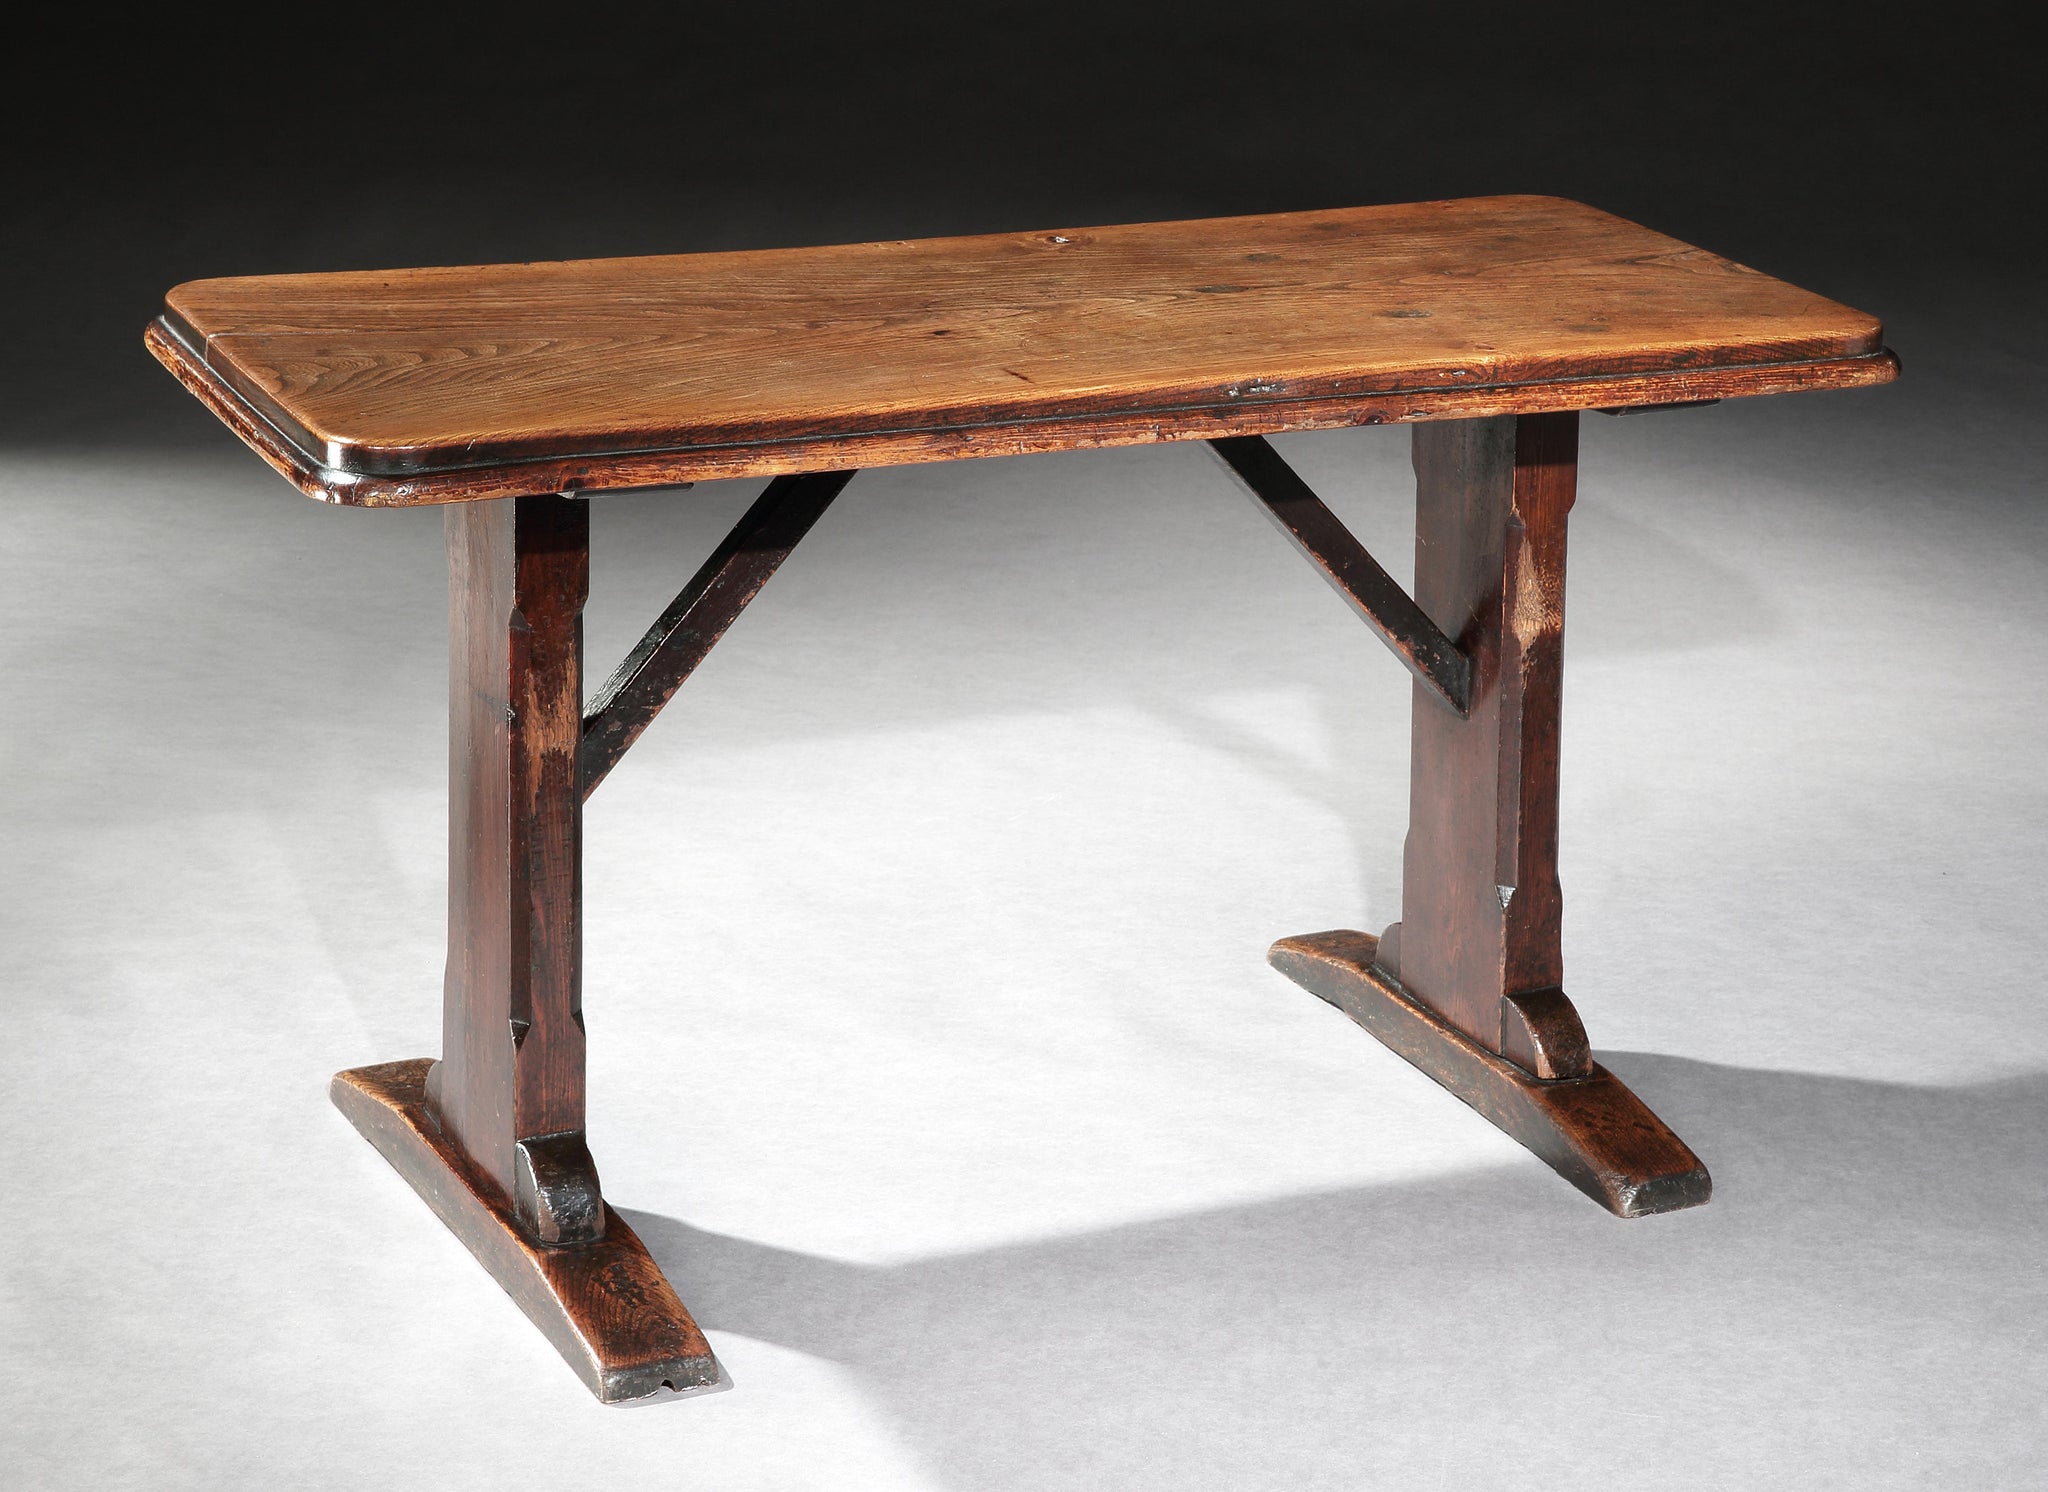 Small Single Plank Top "T" Trestle Based Tavern Table